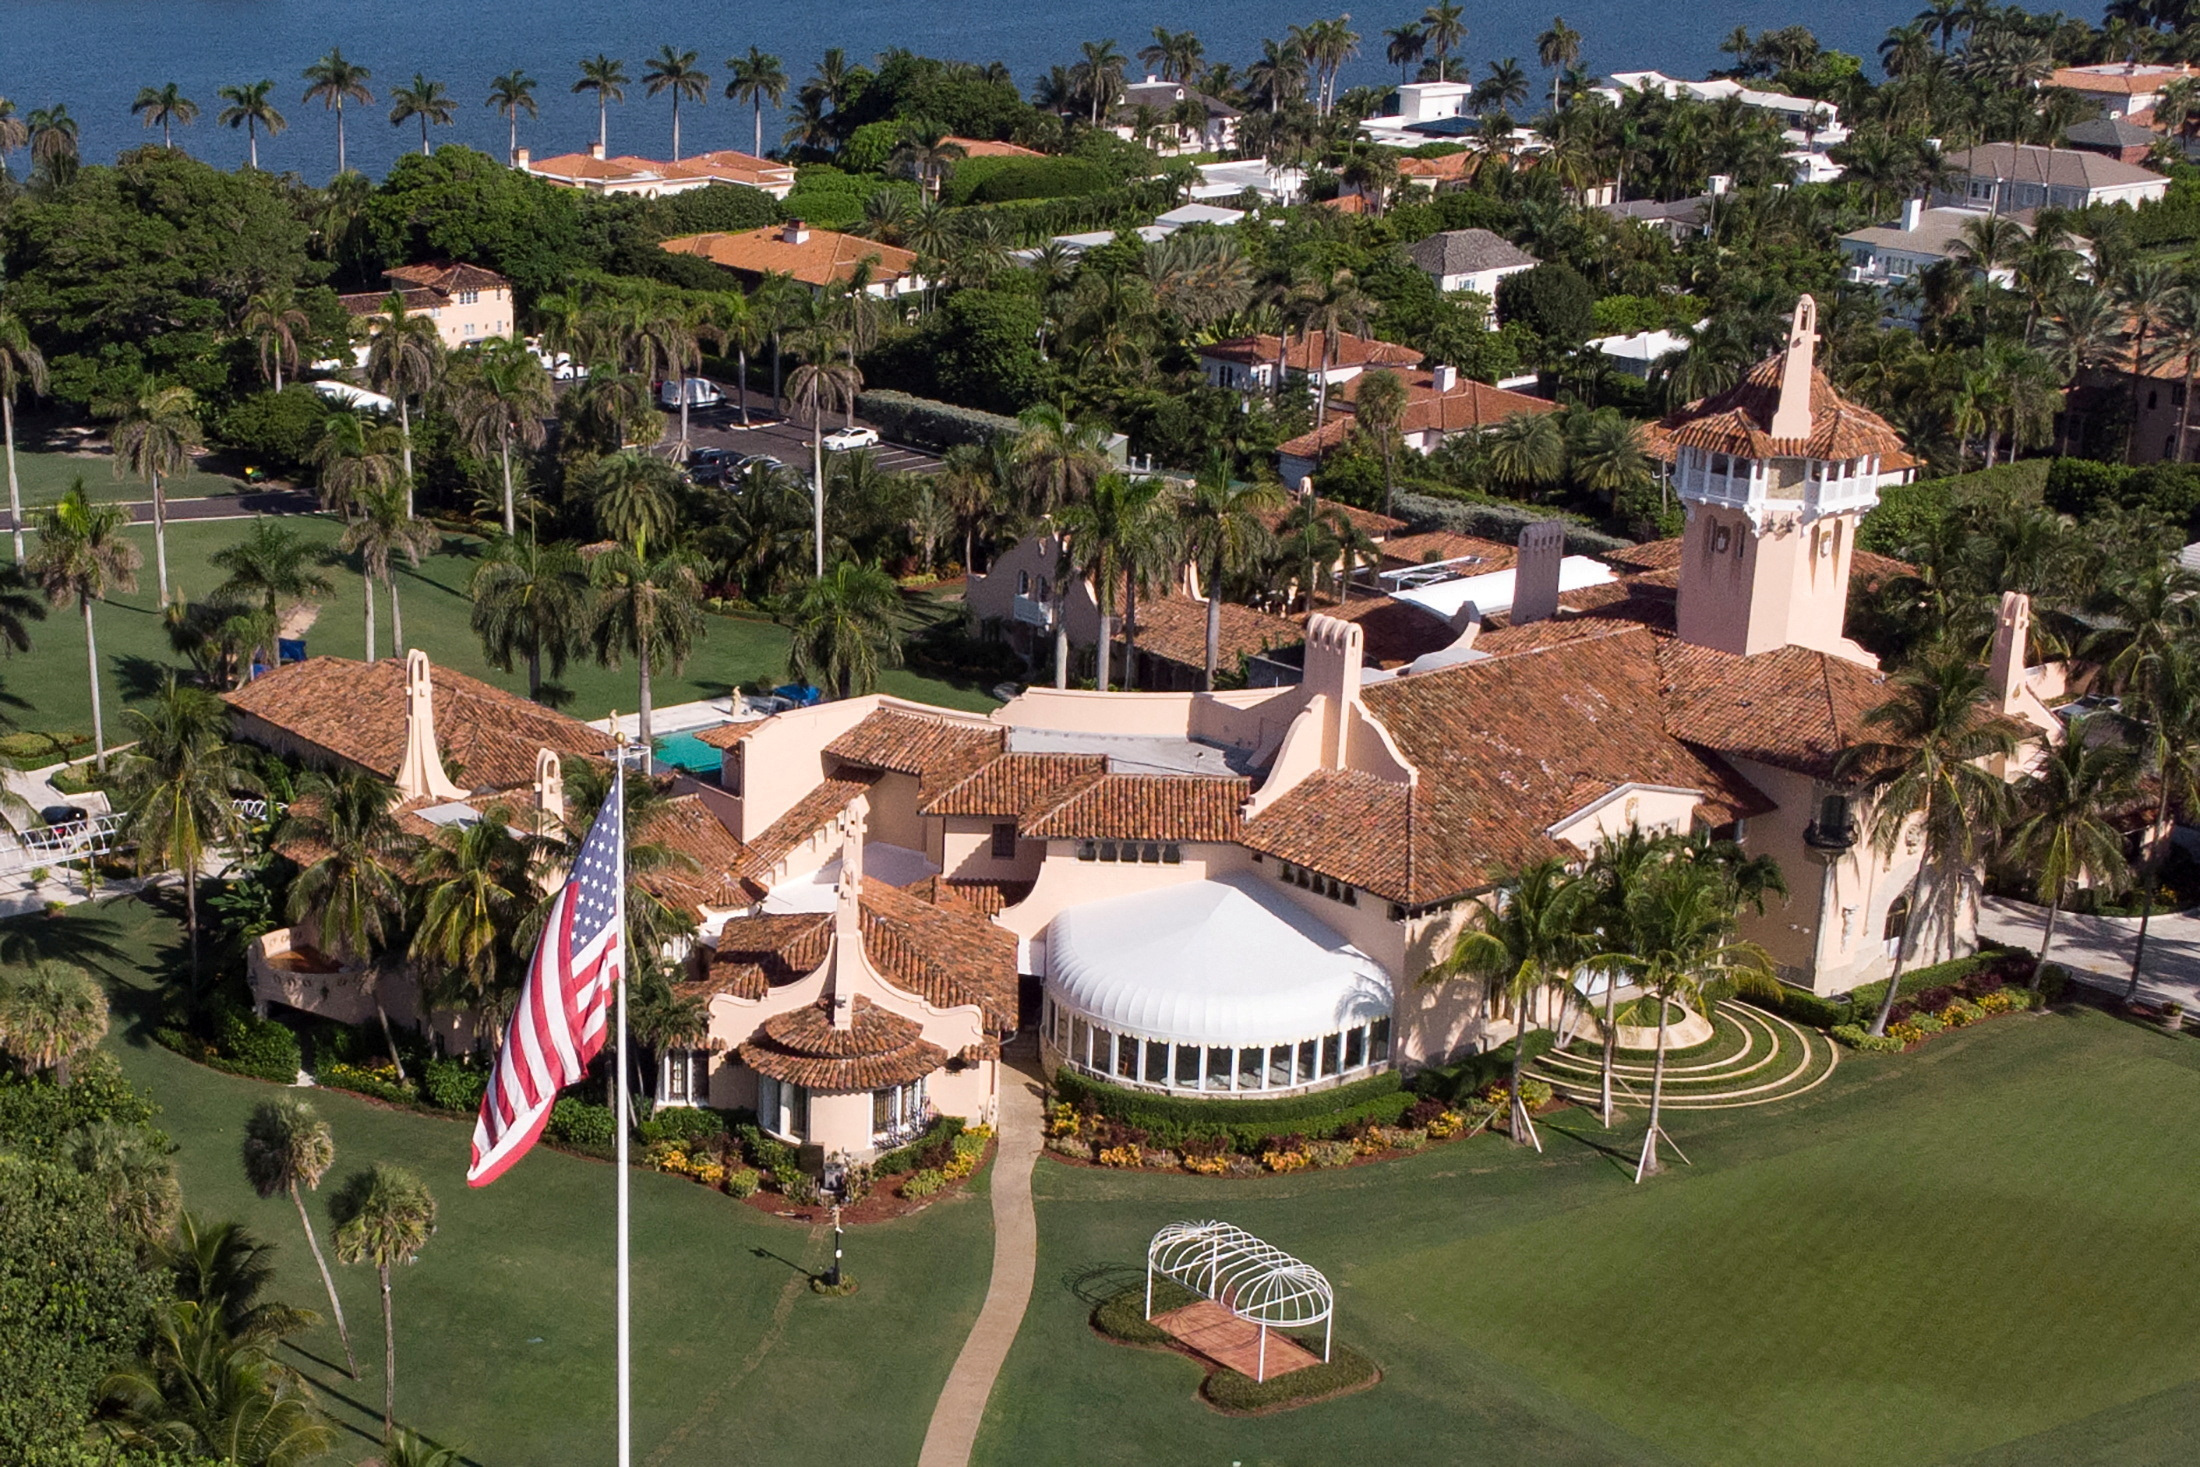 U.S. intelligence to conduct risk assessment of recovered Mar-a-Lago materials